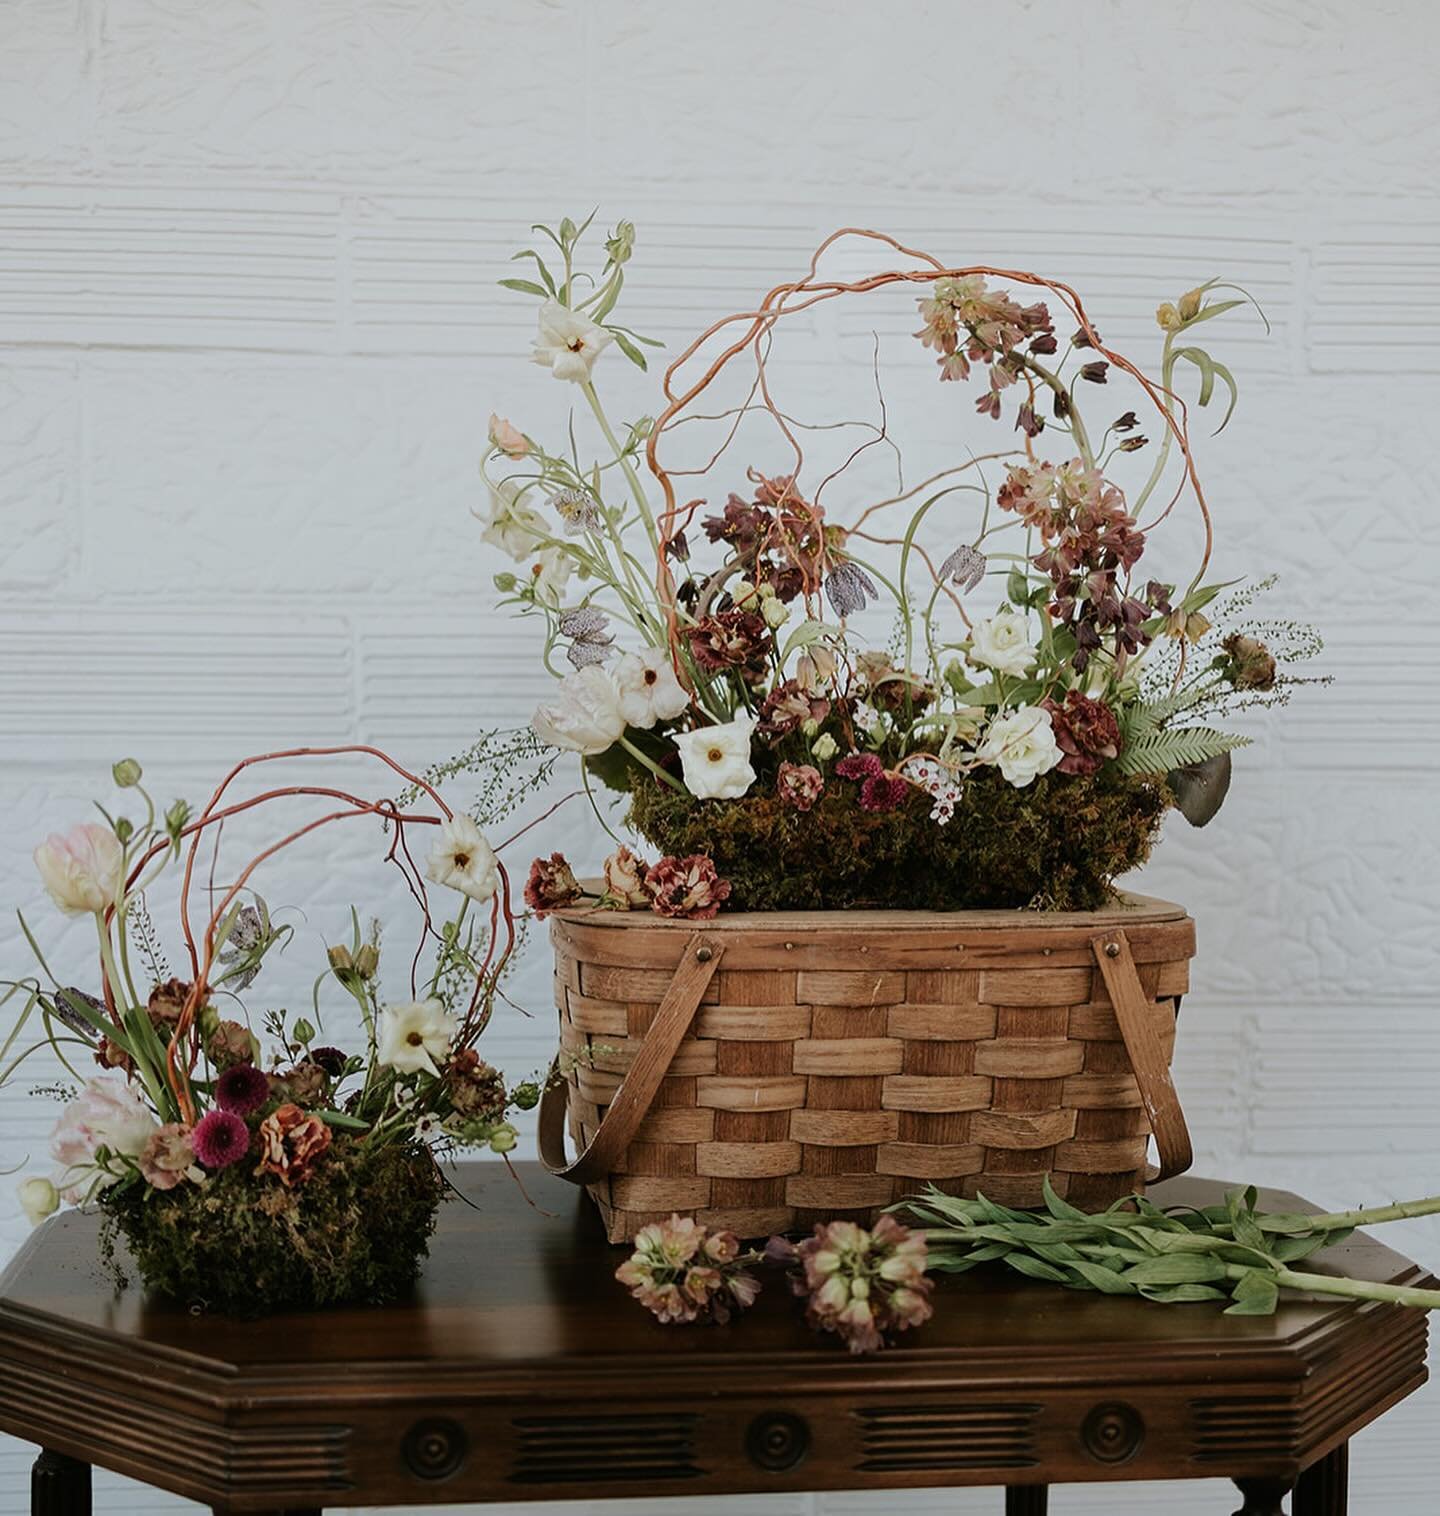 Check out these cool SPRING WOODLAND ARRANGEMENTS available for Mother&rsquo;s Day over on our website (link in profile). They are filled with all sorts of spring blooms like fritillaria, muscari, ranunculus, and tulips and they are arranged in a bed